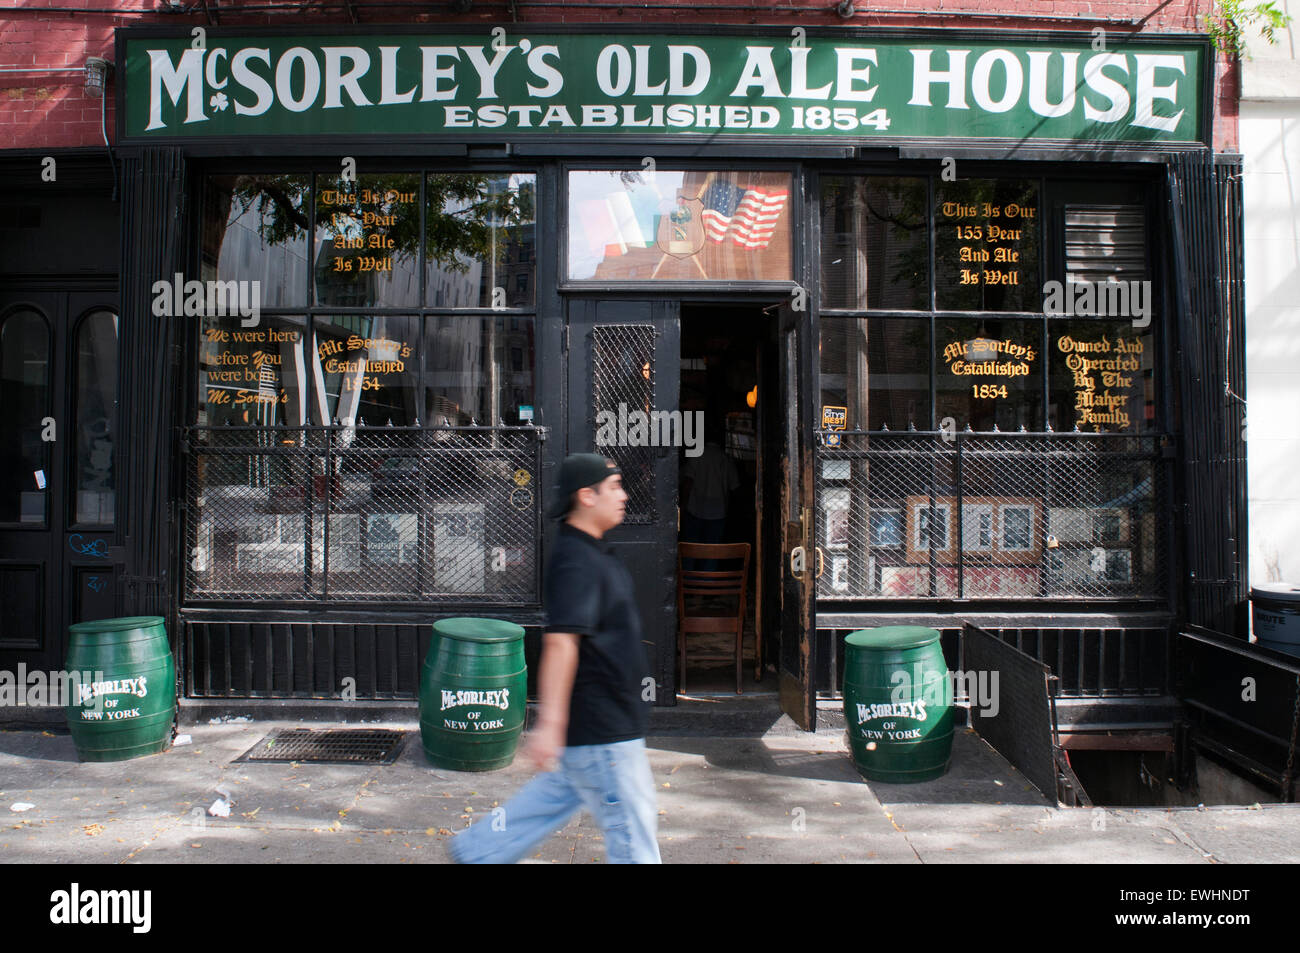 Brewery McSorley's Old Ale Hose in the East Village. With over 100 years standing, for real beer is passed according to his owner, presidents, residents, authors and thieves and they have raised their drink and have provided uttering the phrase 'Be nice or go away.' Works since 1854. This quirky bar where they make themselves their own beer is a good place to stop along the way and enjoy a good fish (7-10 U.S. $), soup or sandwiches 3.5 U.S. $ 4 U.S. $ accompanied by an authentic cold beer. Stock Photo